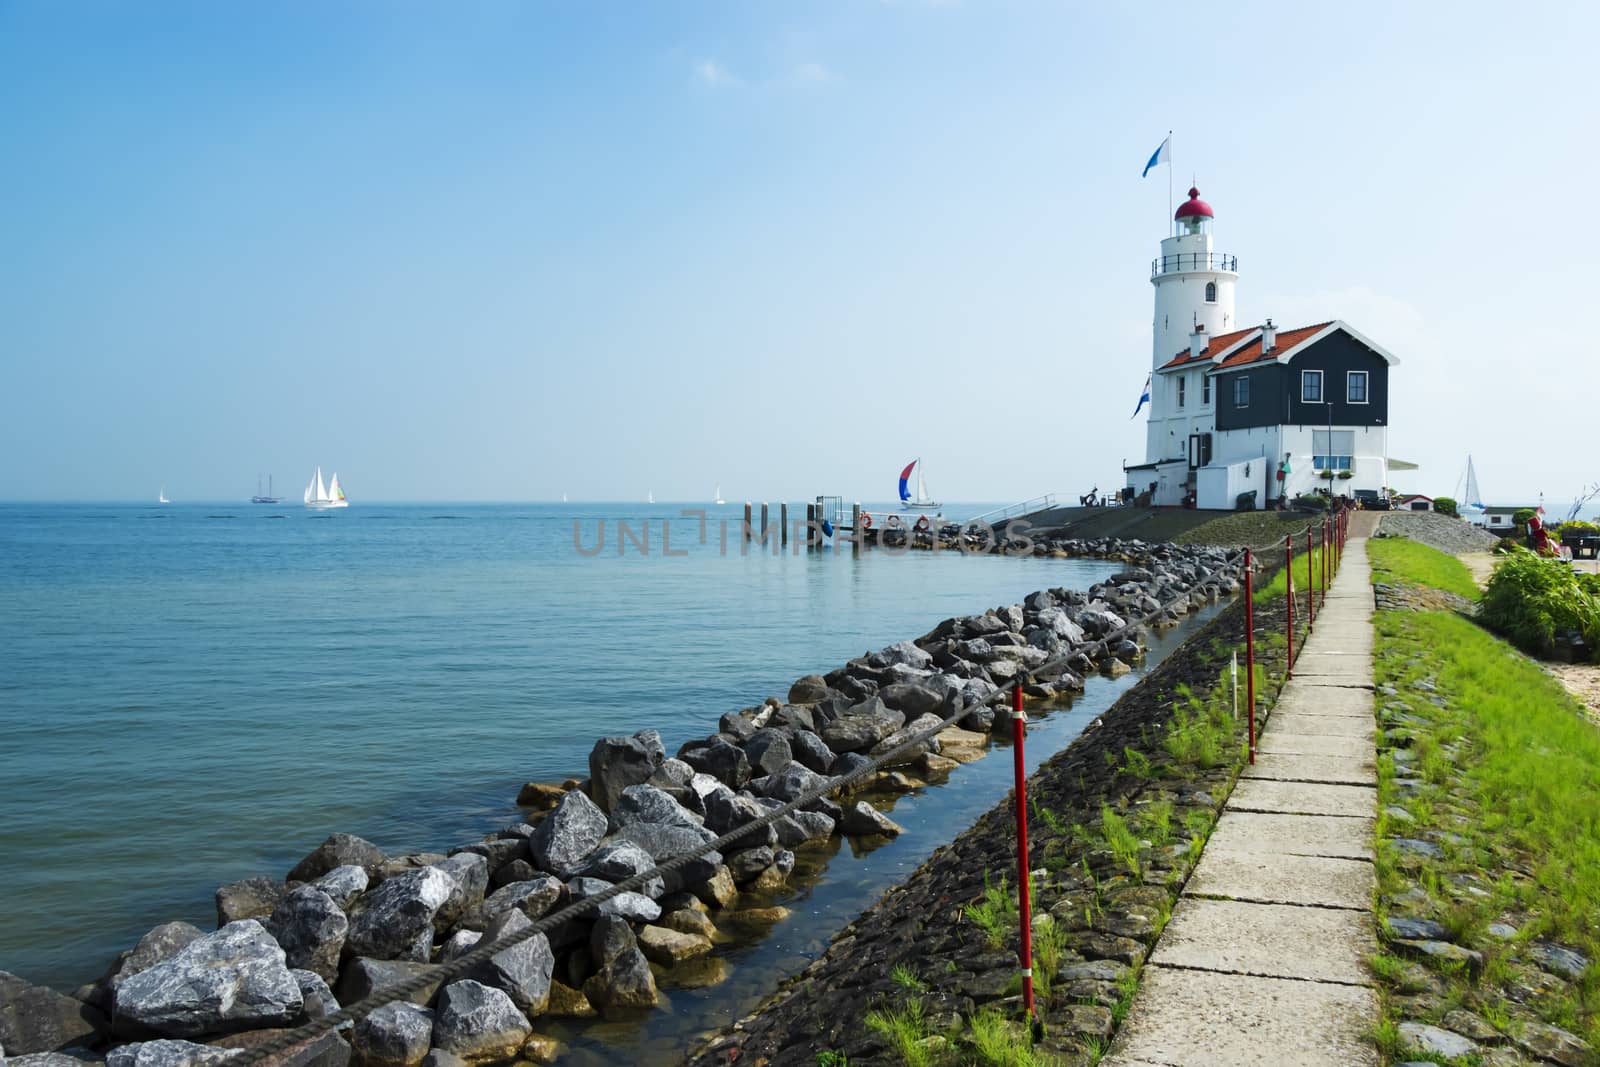 The road to lighthouse, Marken, the Netherlands by Tetyana